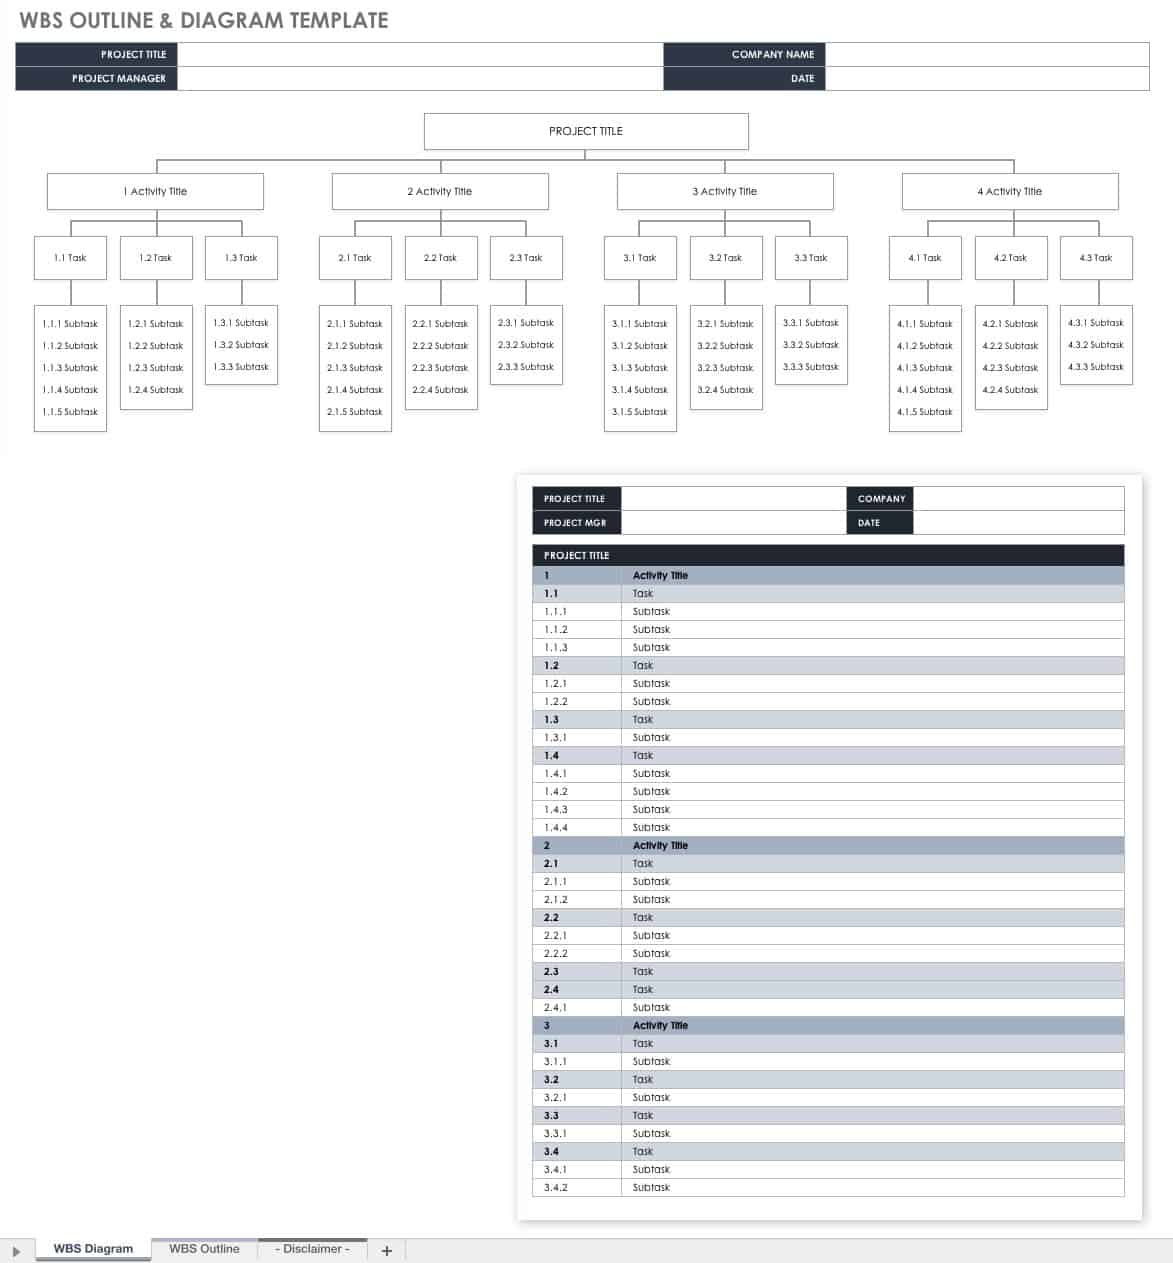 WBS Outline and Diagram Template